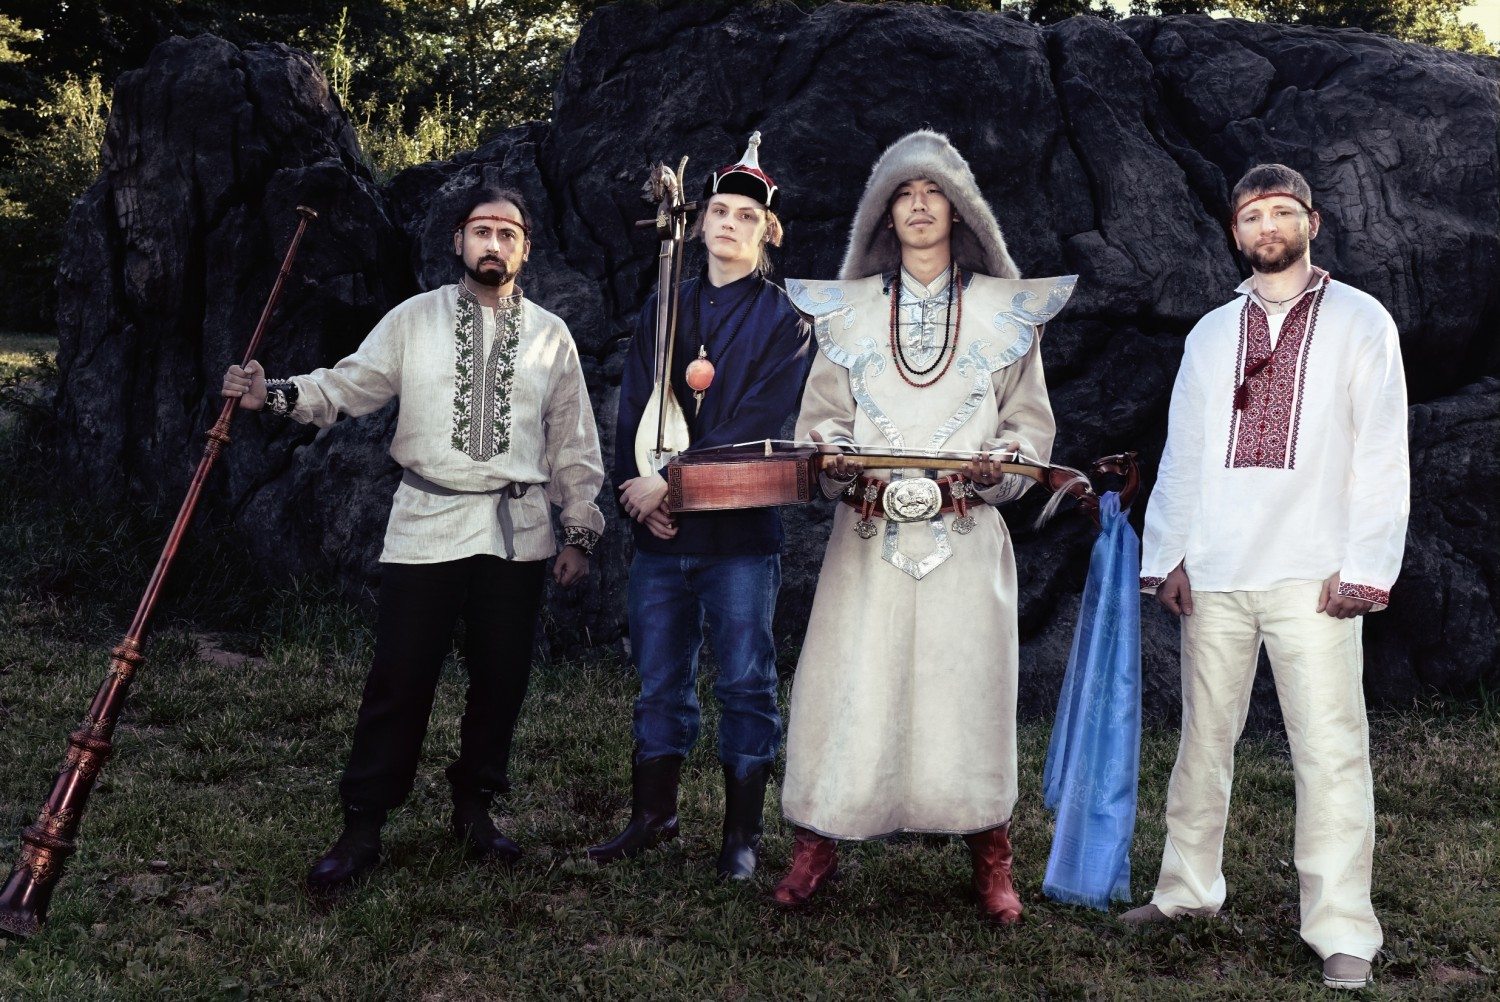 Tengger Cavalry’s Nature Ganganbaigal gets ready for Carnegie Hall show, talks Mongolia and life as a New York City transplant